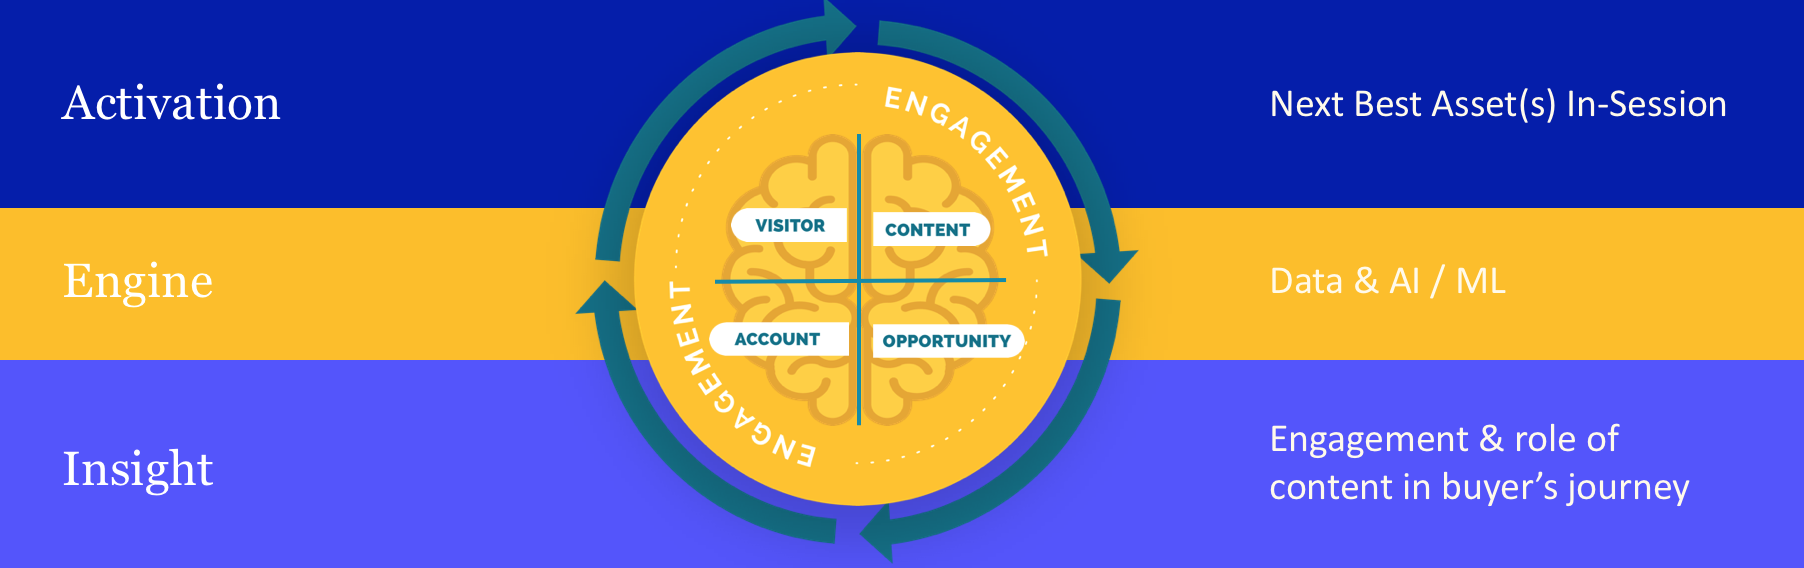 Three layers to PathFactory - top layer - Activation - Next Best Asset(s) in session.  Second layer, Engine - Data & AI & ML. Bottom layer - Insight - Engagement & role of content in buyer's journey. Middle image of Engagement - perpetual circle - including visitor, content account and opportunity.